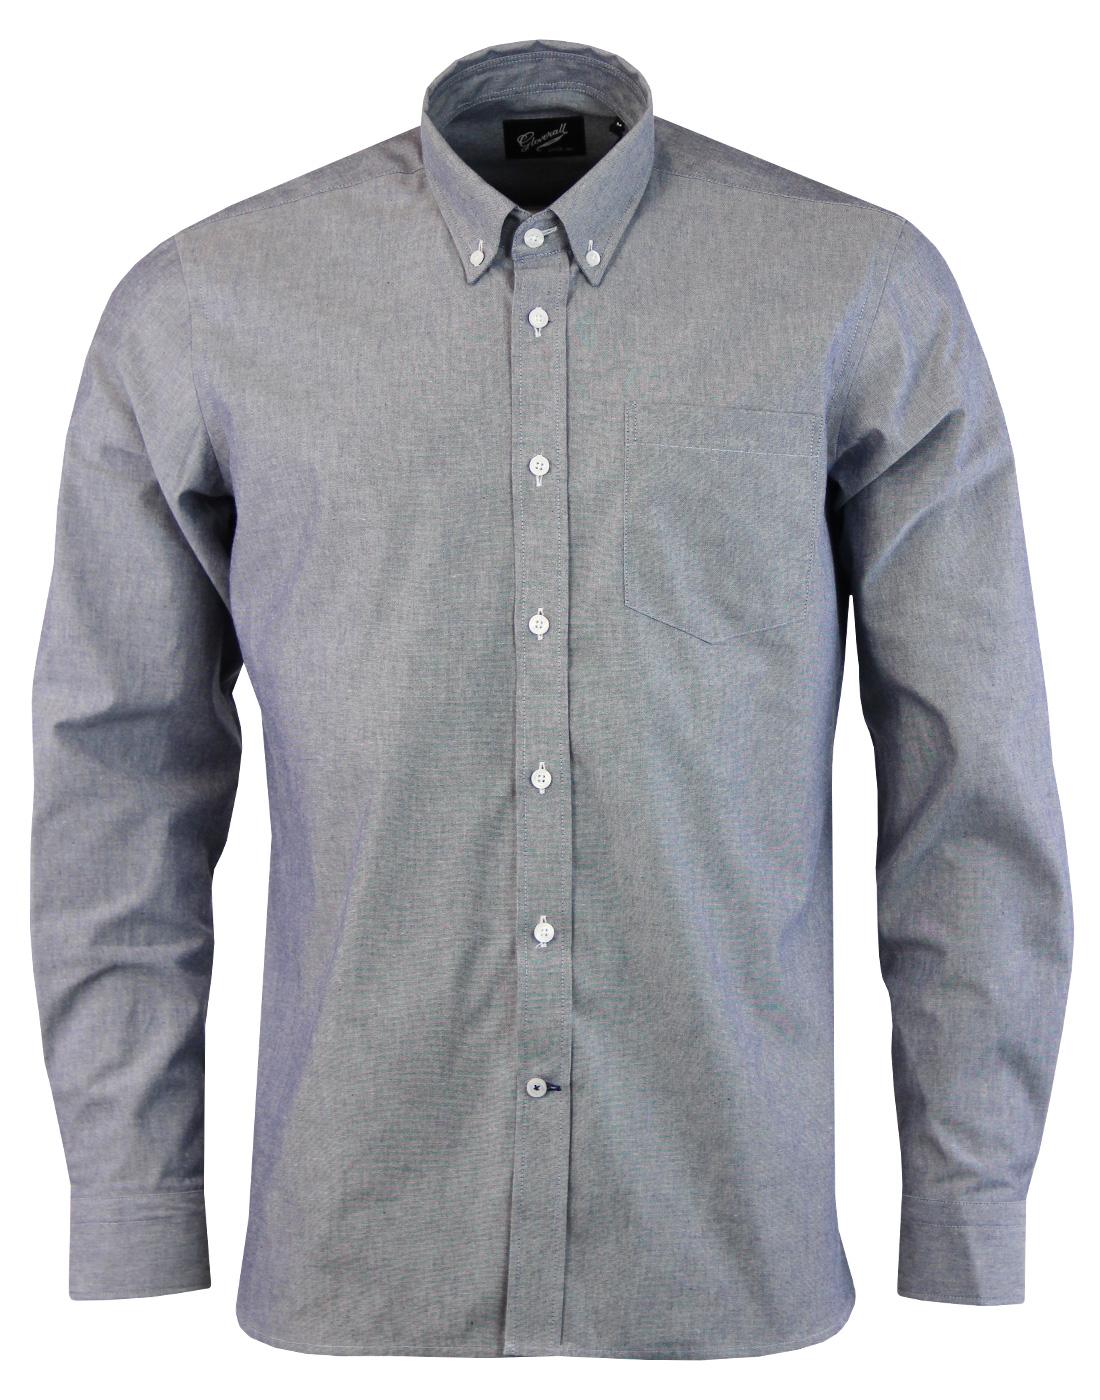 GLOVERALL Men's Retro 60s Mod Button Down Chambray Shirt in Blue